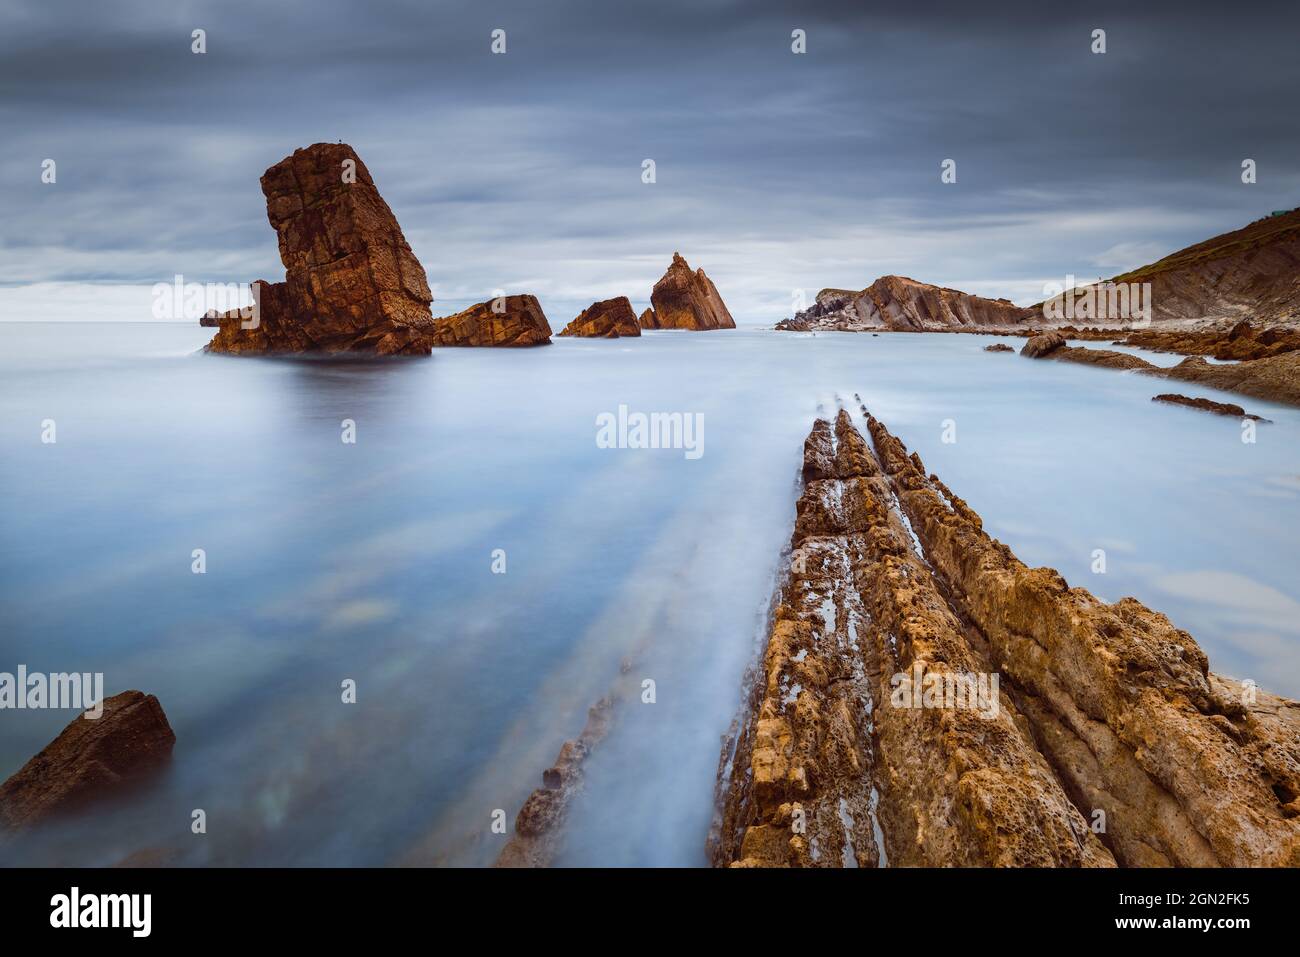 SPAIN, CANTABRIA, LIENCRES. VIEW FROM BELOW OF ARNIA BEACH WITH ITS CUT ROCKS Stock Photo